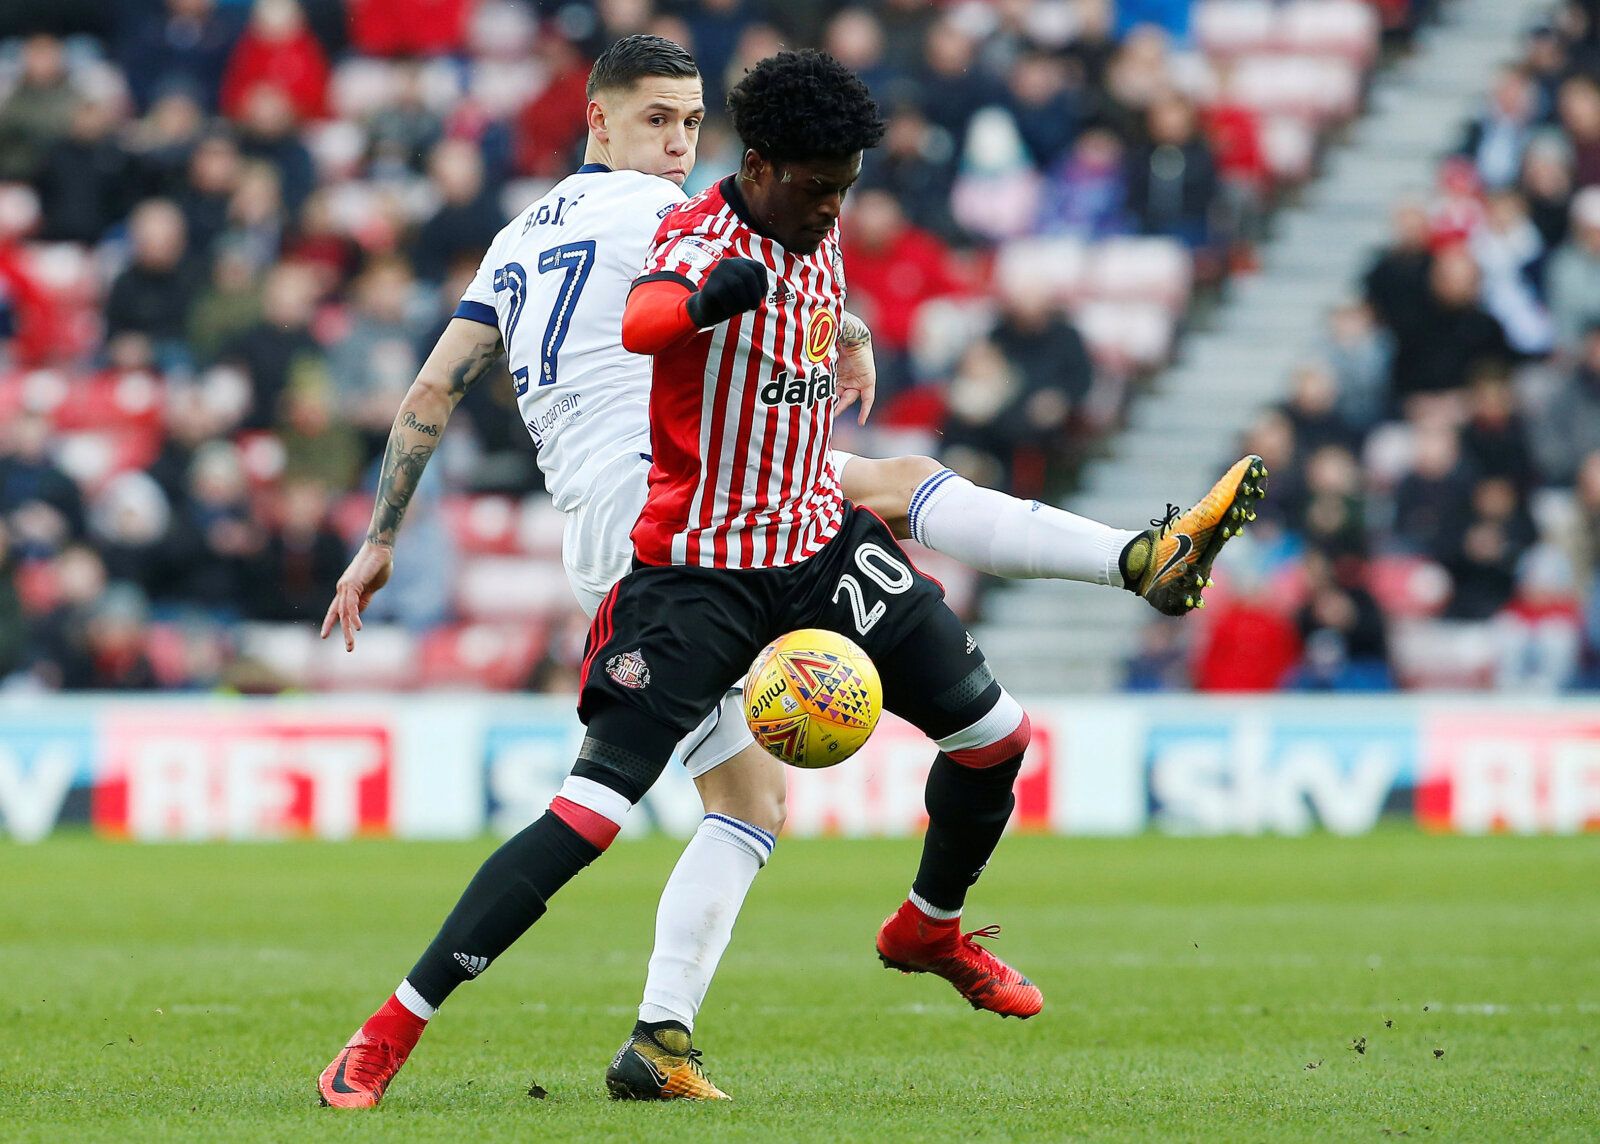 Soccer Football - Championship - Sunderland vs Middlesbrough - Stadium of Light, Sunderland, Britain - February 24, 2018   Middlesbrough's Muhamed Besic (L) in action with Sunderland's Josh Maja   Action Images/Craig Brough    EDITORIAL USE ONLY. No use with unauthorized audio, video, data, fixture lists, club/league logos or 